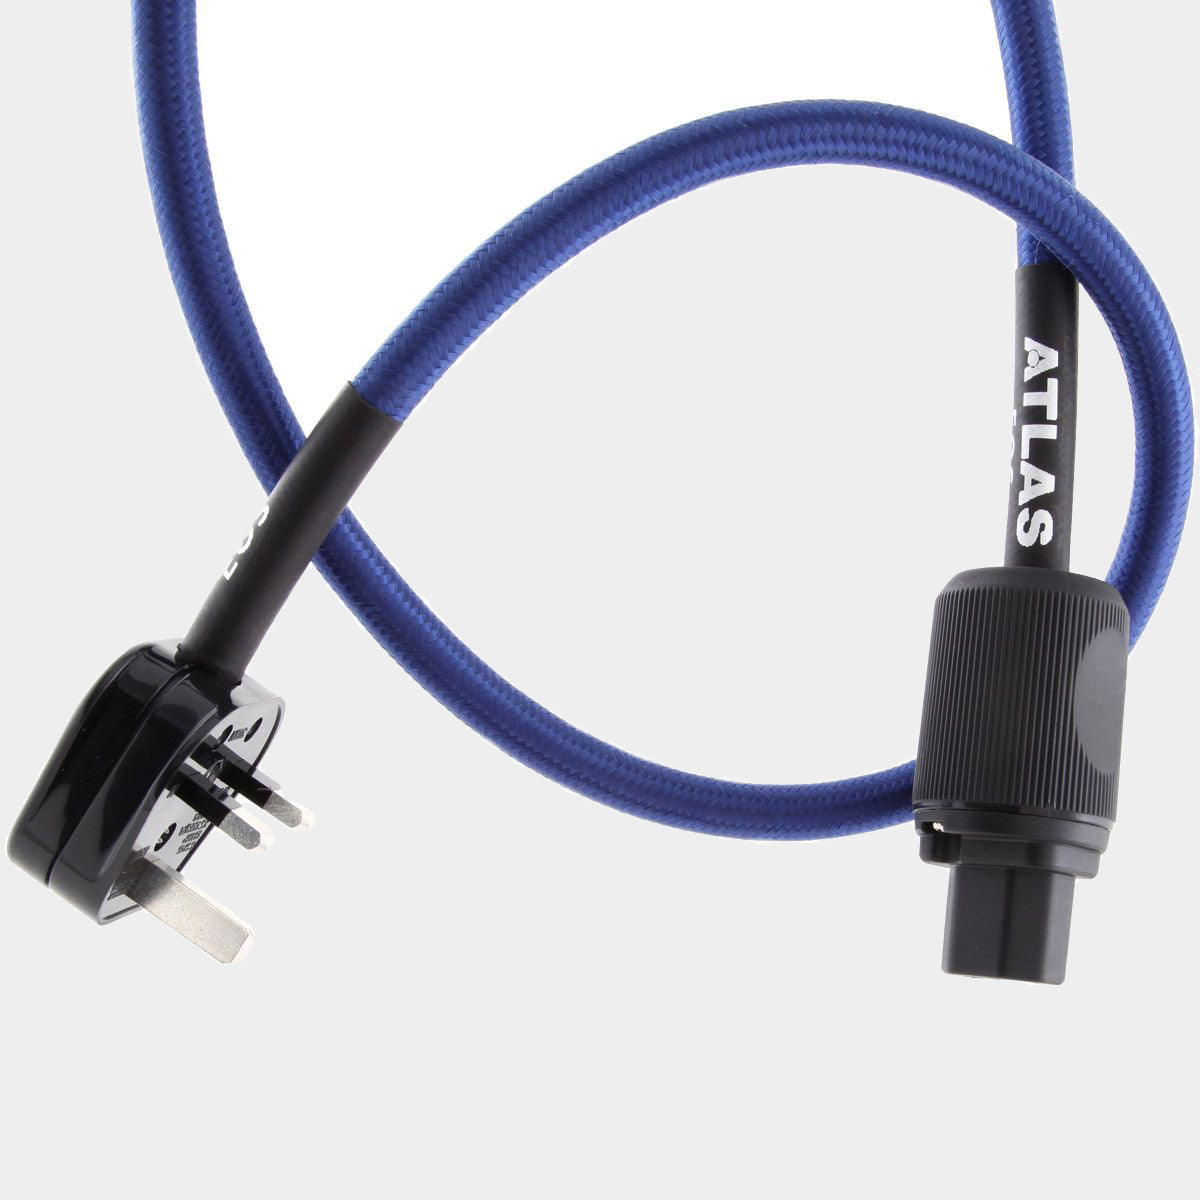 Atlas | Eos 4dd | UK Mains Power Cable | Holburn Online